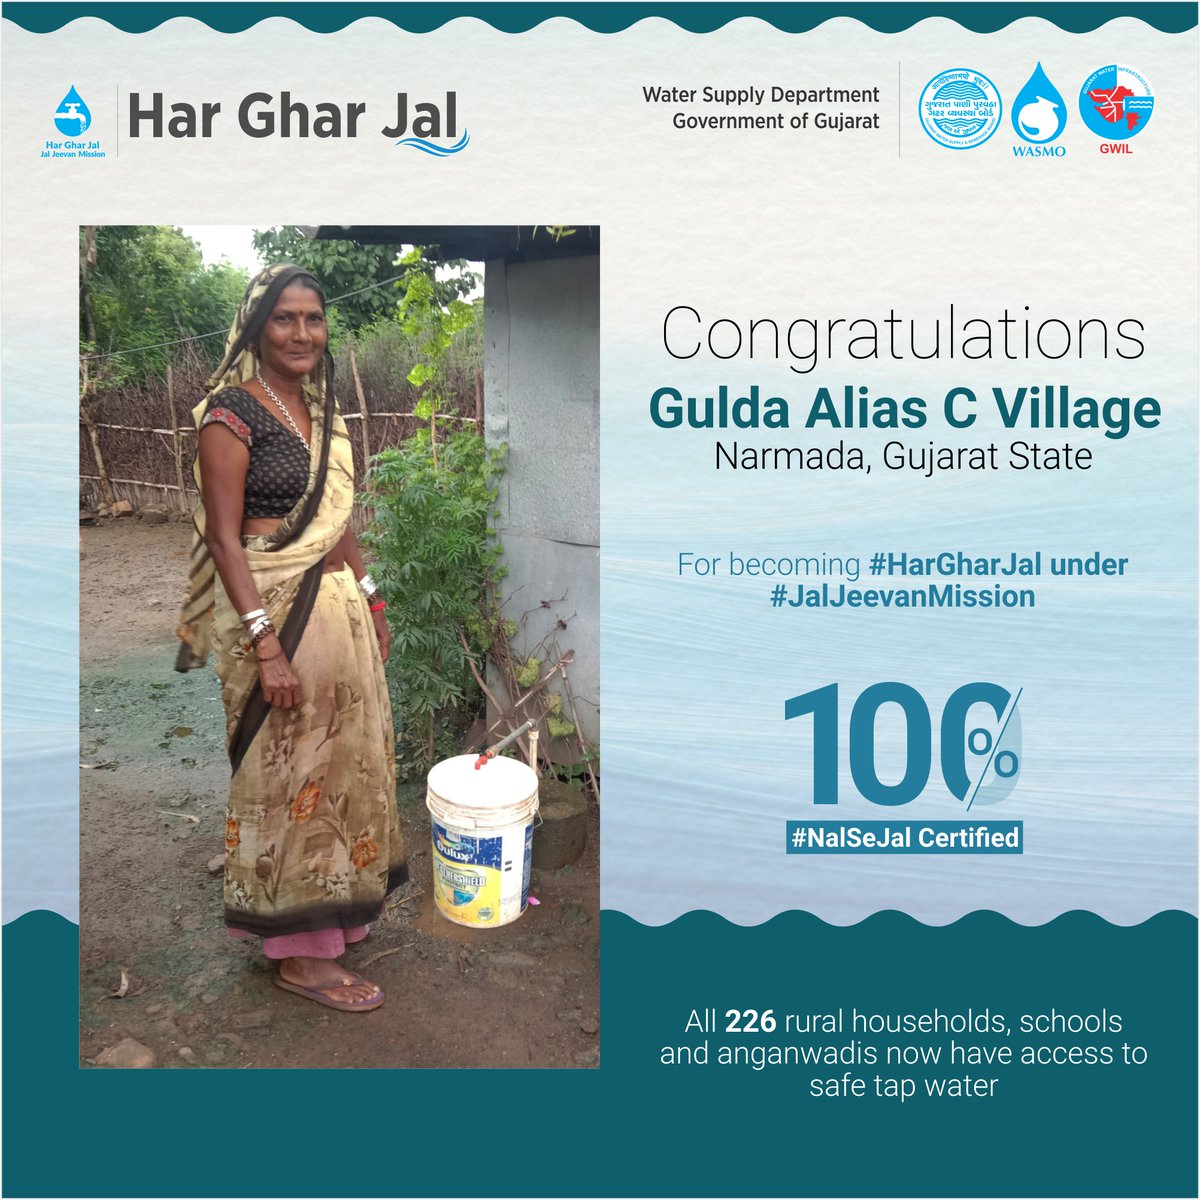 Congratulations to all the people of Gulda Alias C Village of #Narmada, #Gujarat State, for becoming 100% #HarGharNalSeJal certified. All 226 rural households, schools and anganwadis are now getting safe tap water under #JalJeevanMission